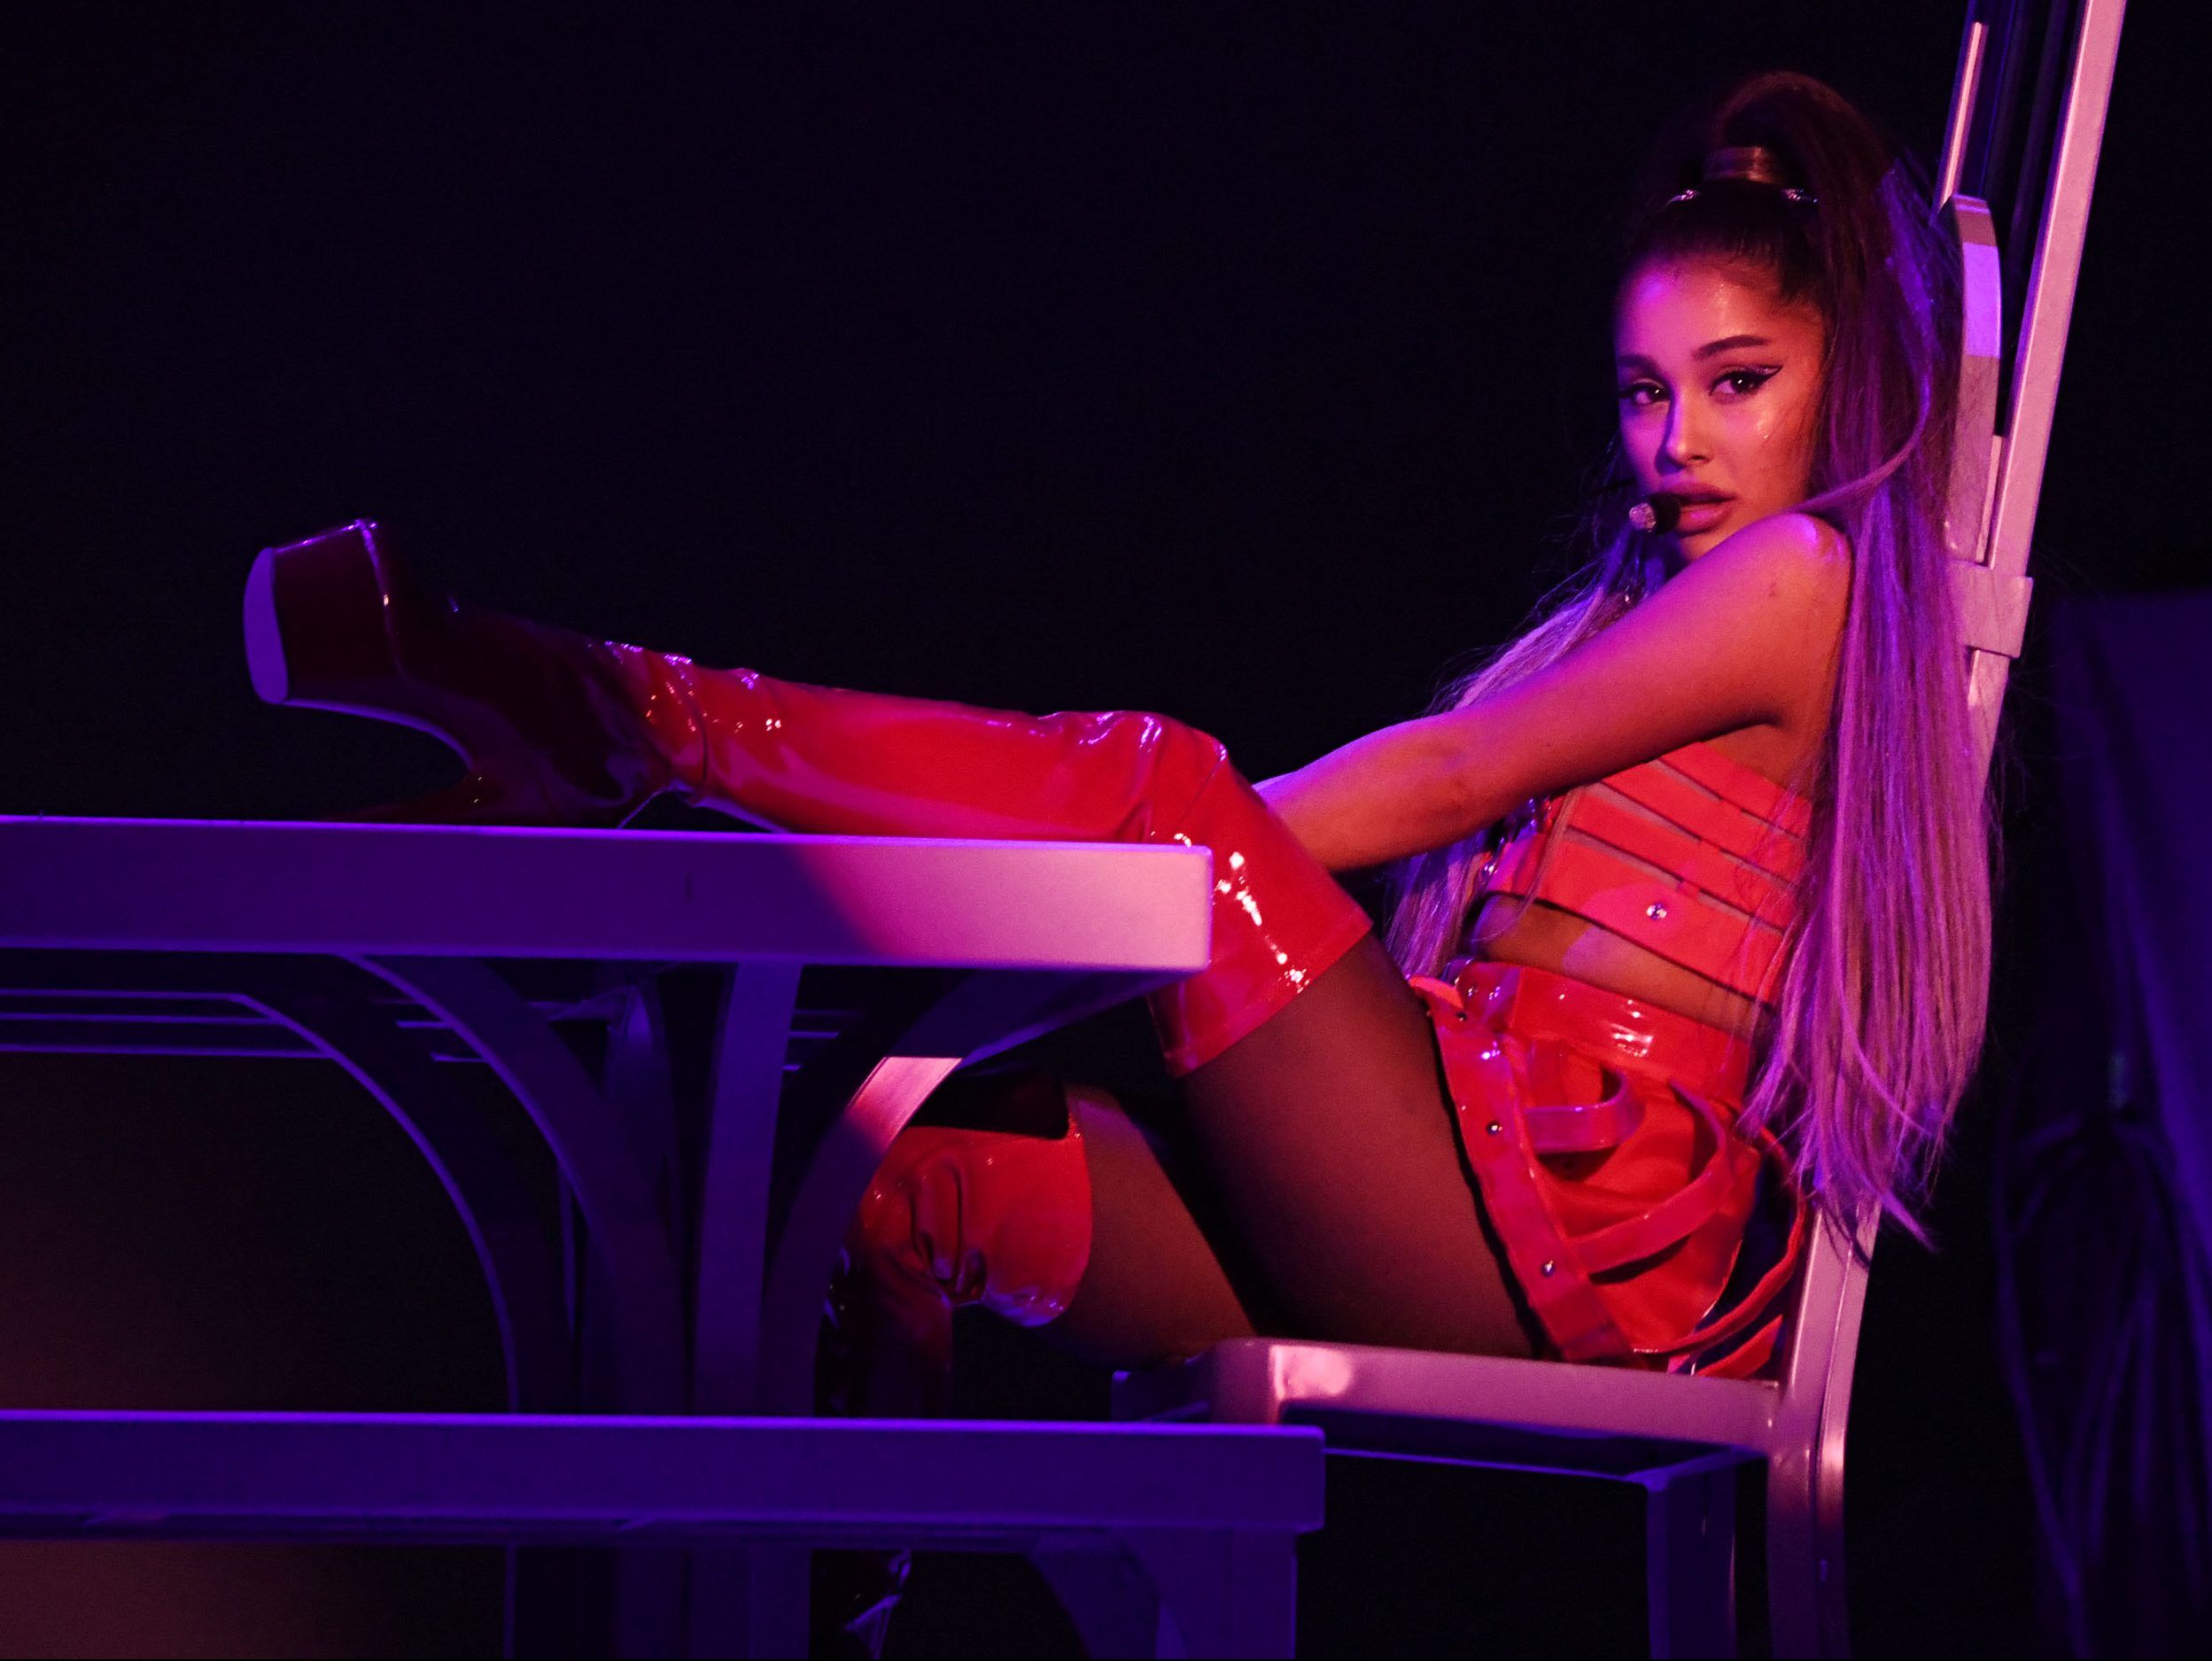 Ariana Grande concertgoers only permitted to bring clear bags into